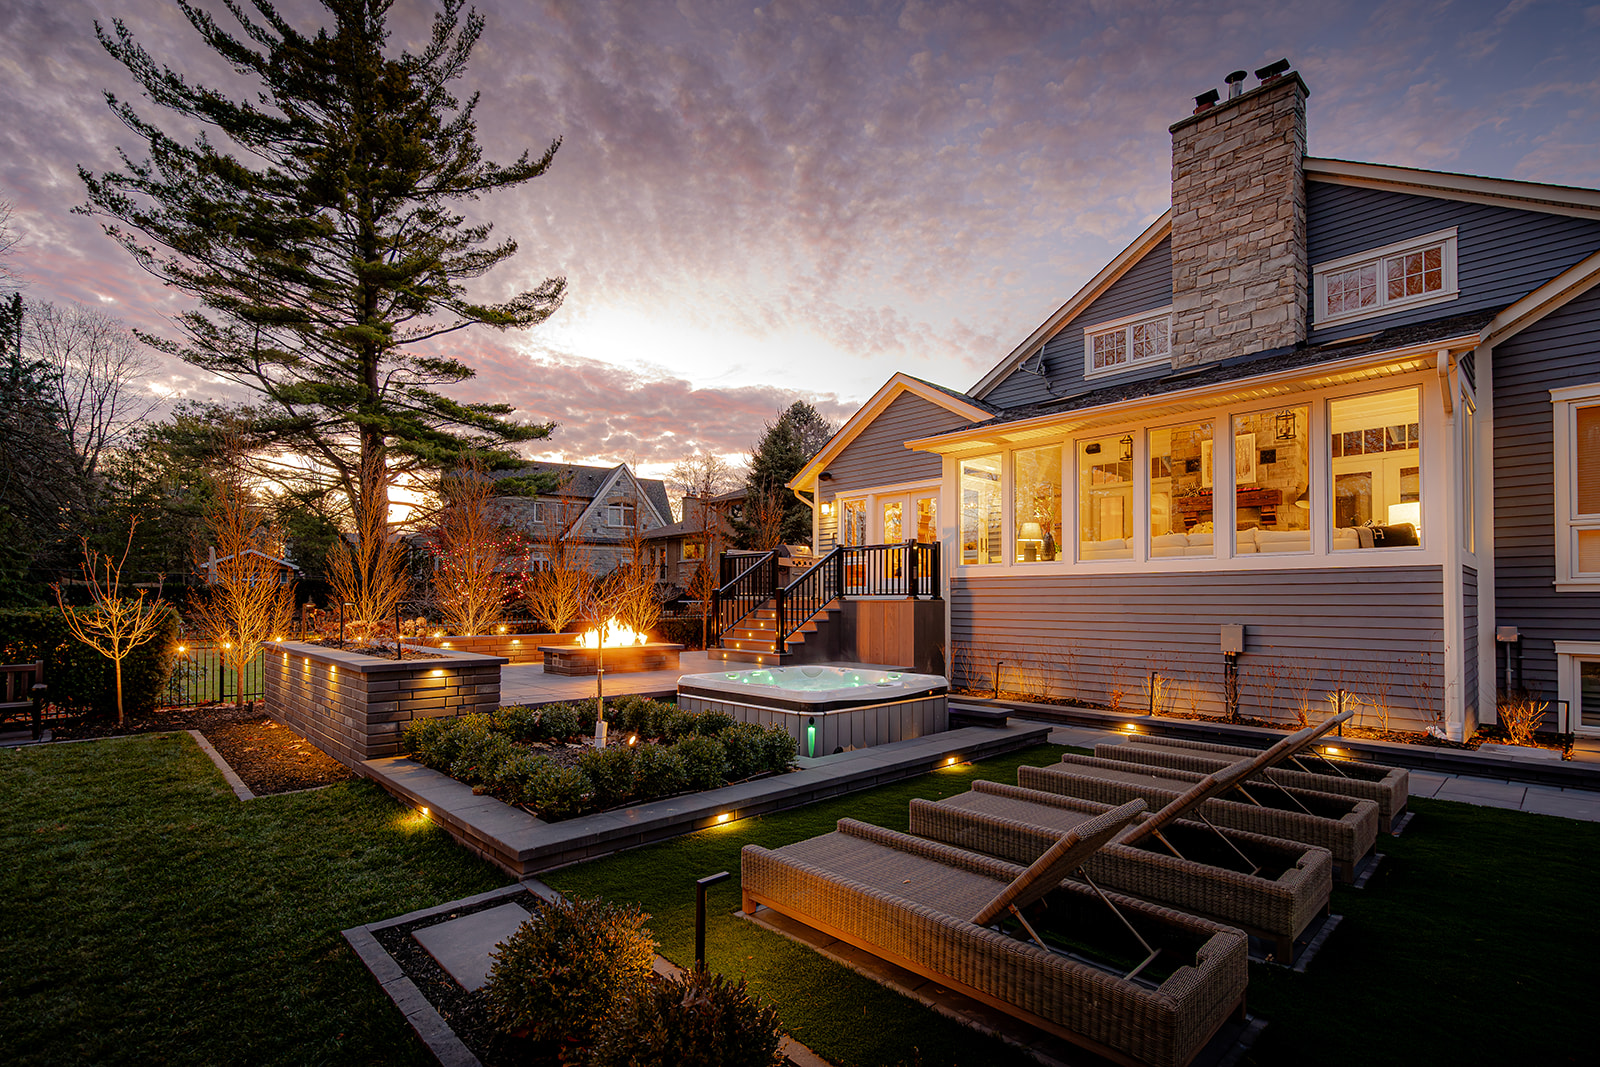 A backyard with lights on in the house and a sunset in the background.